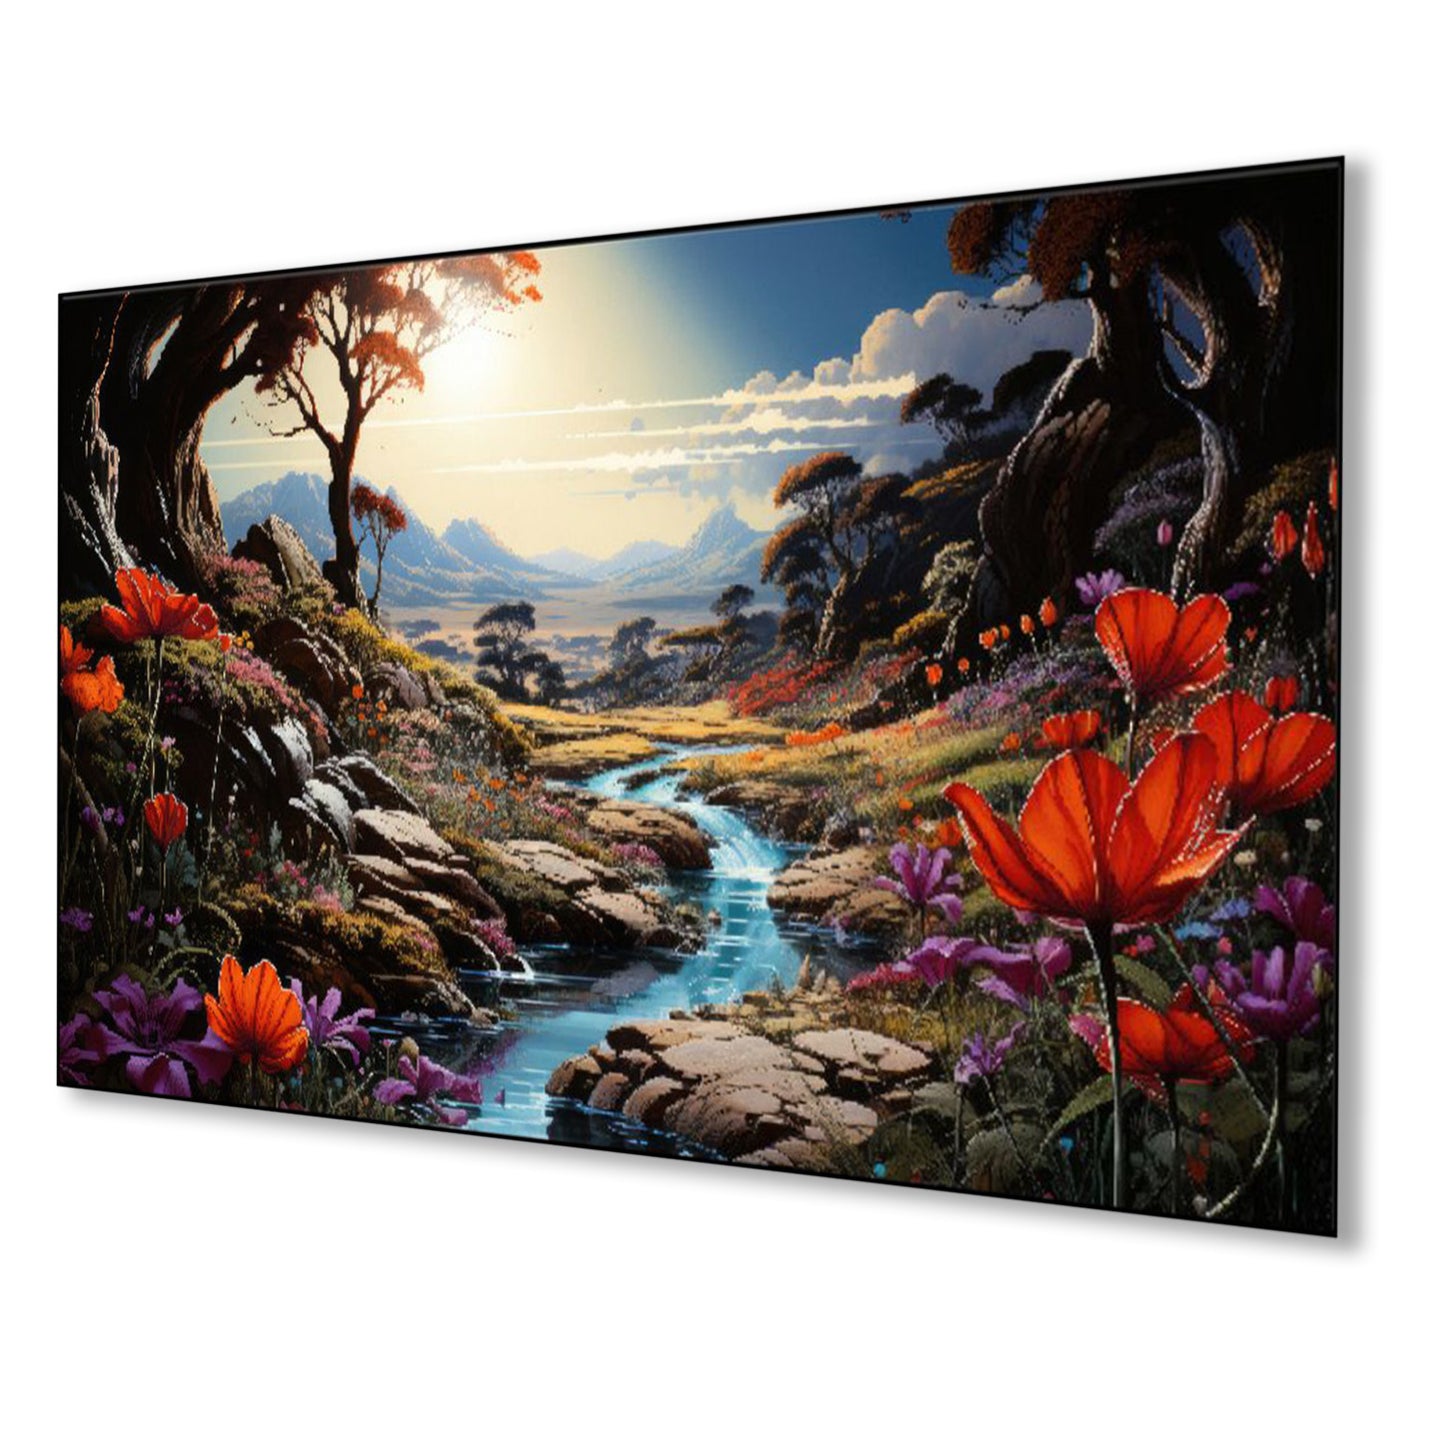 Tranquil Stream: Floral Mountain Scenery Wall Painting